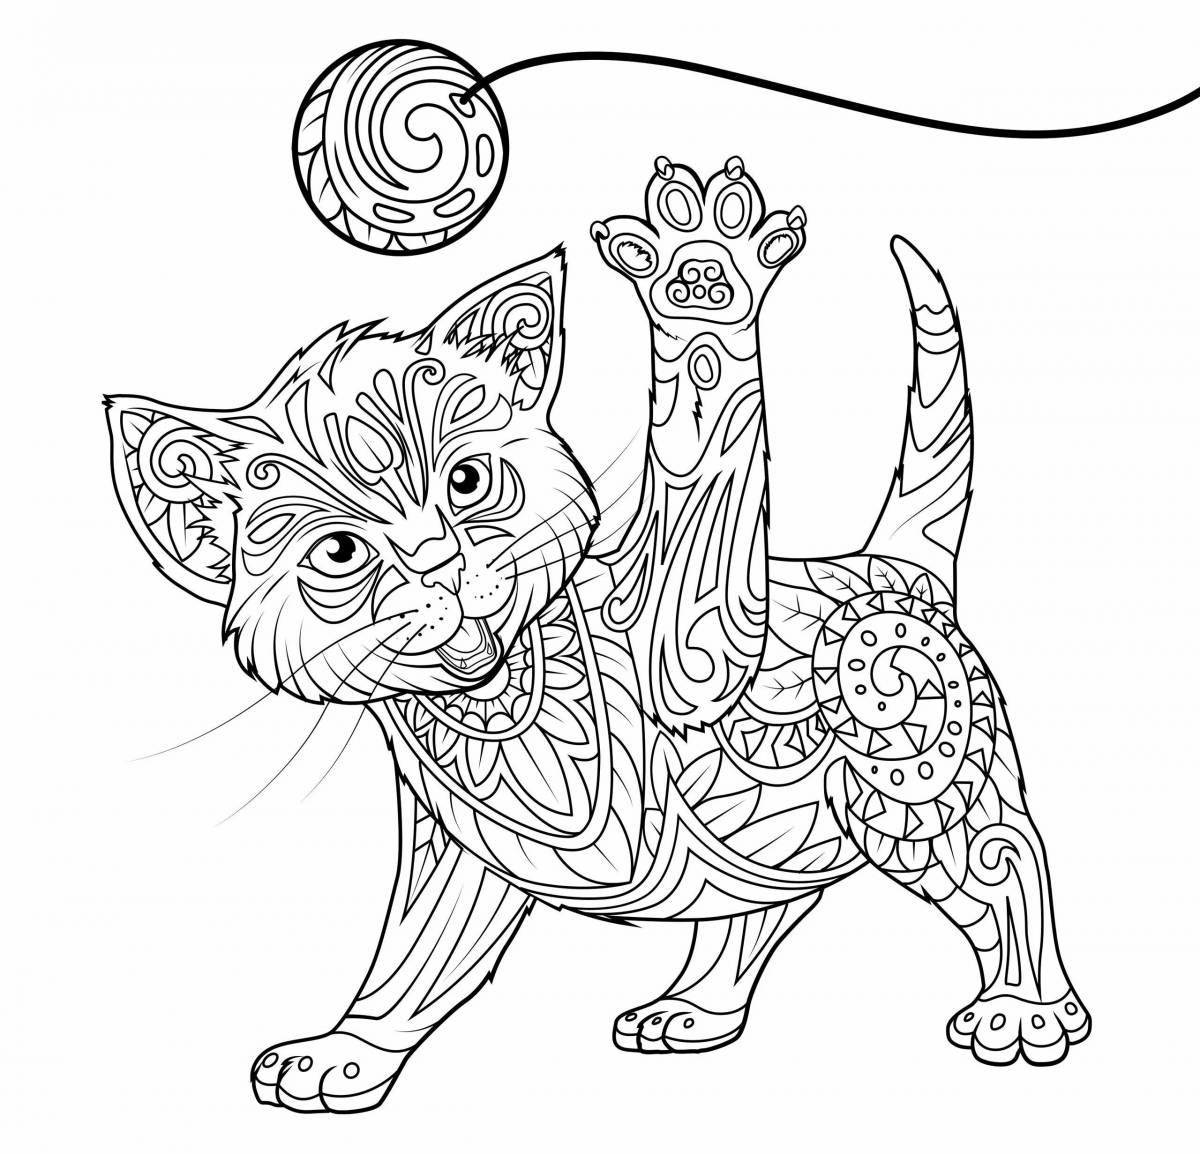 Awesome cat coloring page